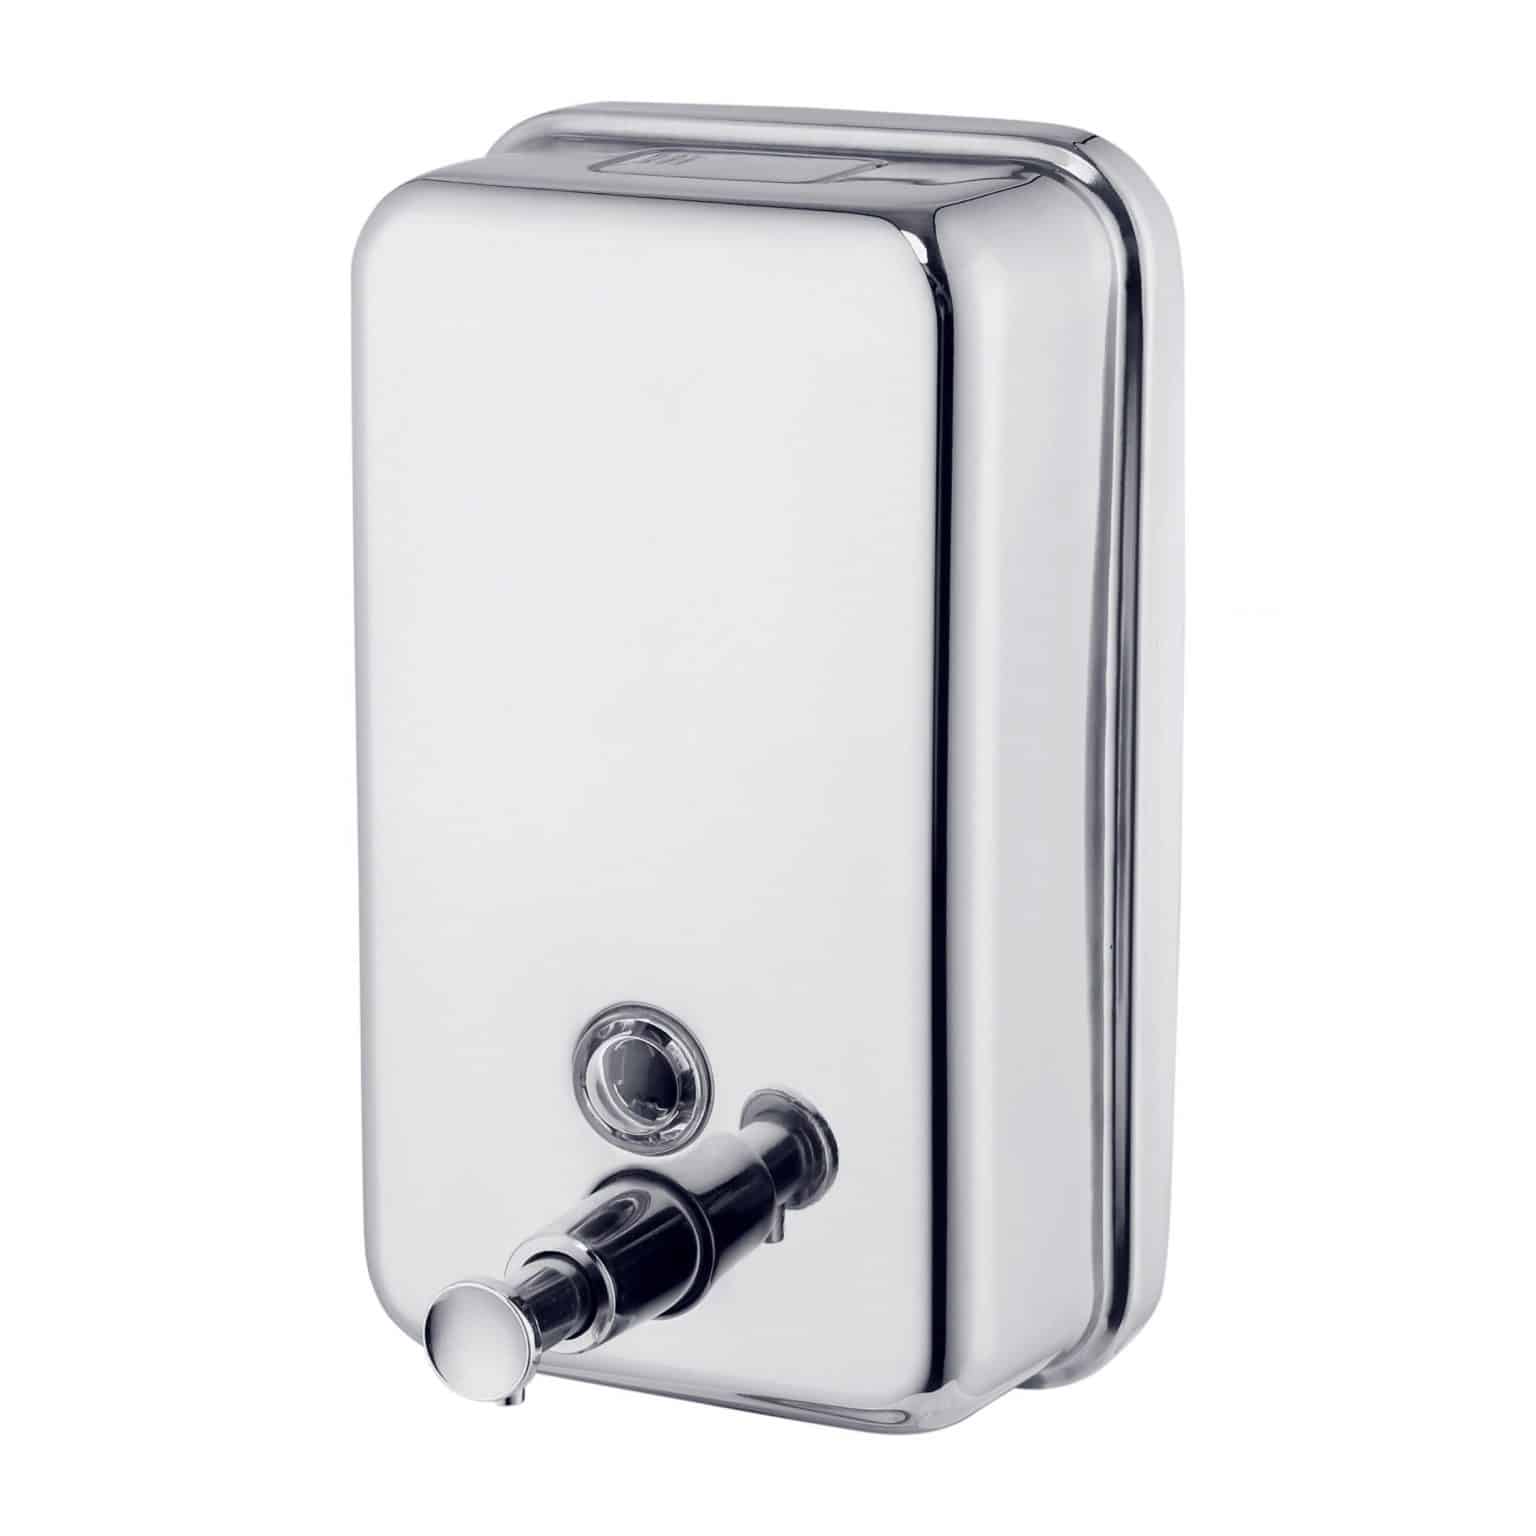 Hot Seller Wall Mounted SUS304 Stainless Steel Soap Dispenser For Bathroom 4201  1536x1536 